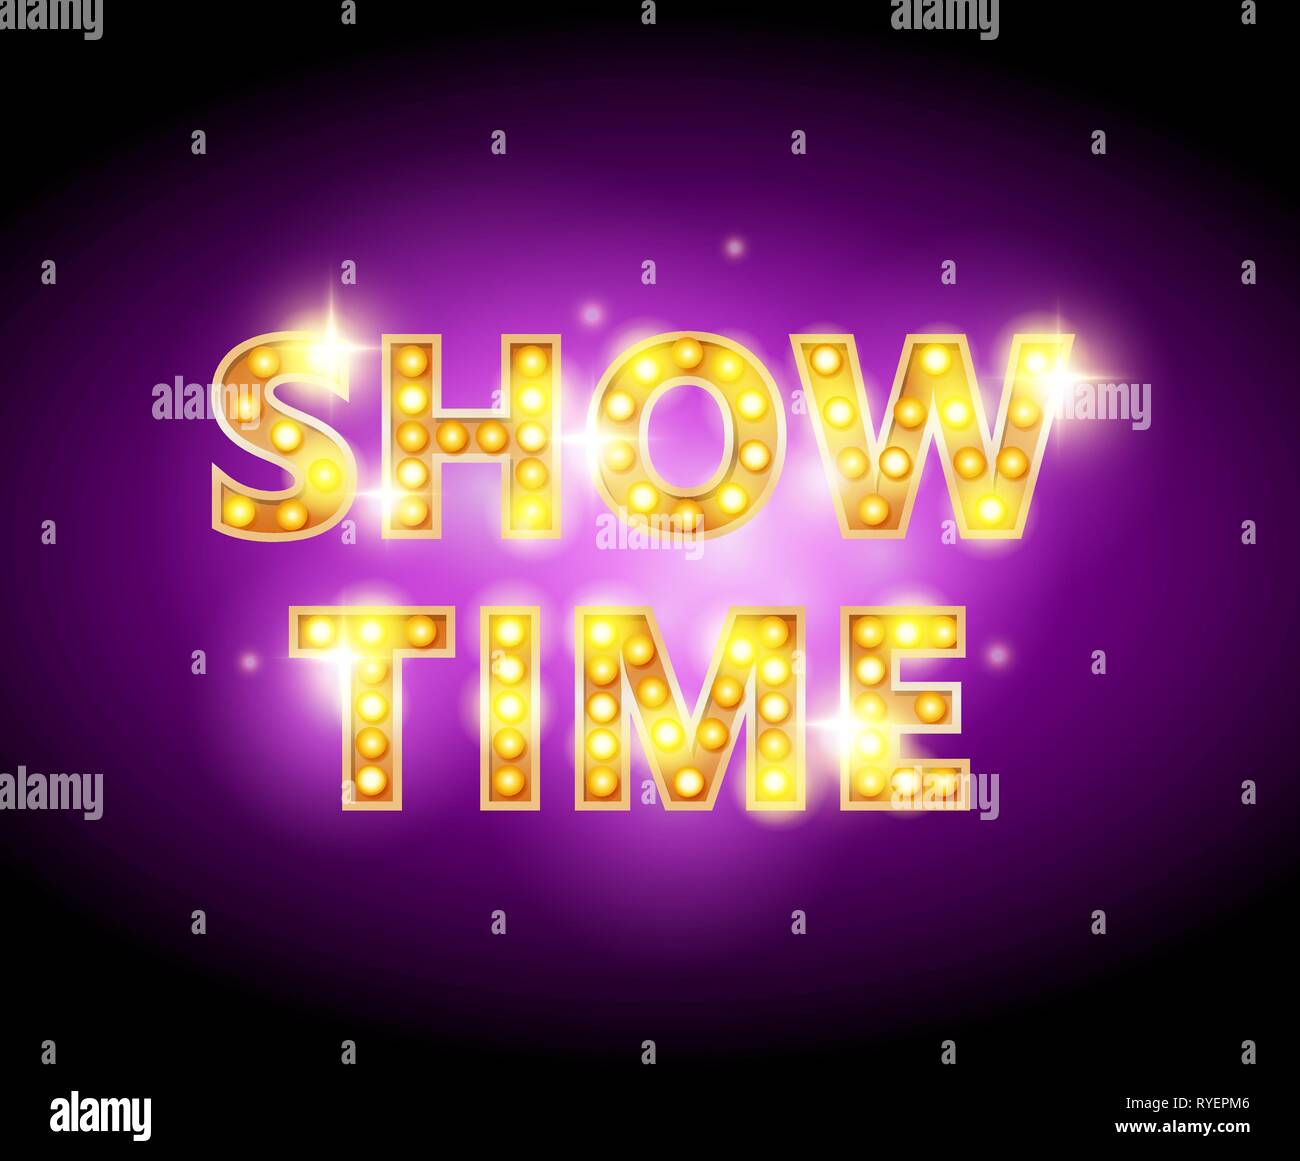 Show time bulb letters advertisement vector illustration. Colorful background. Stock Vector